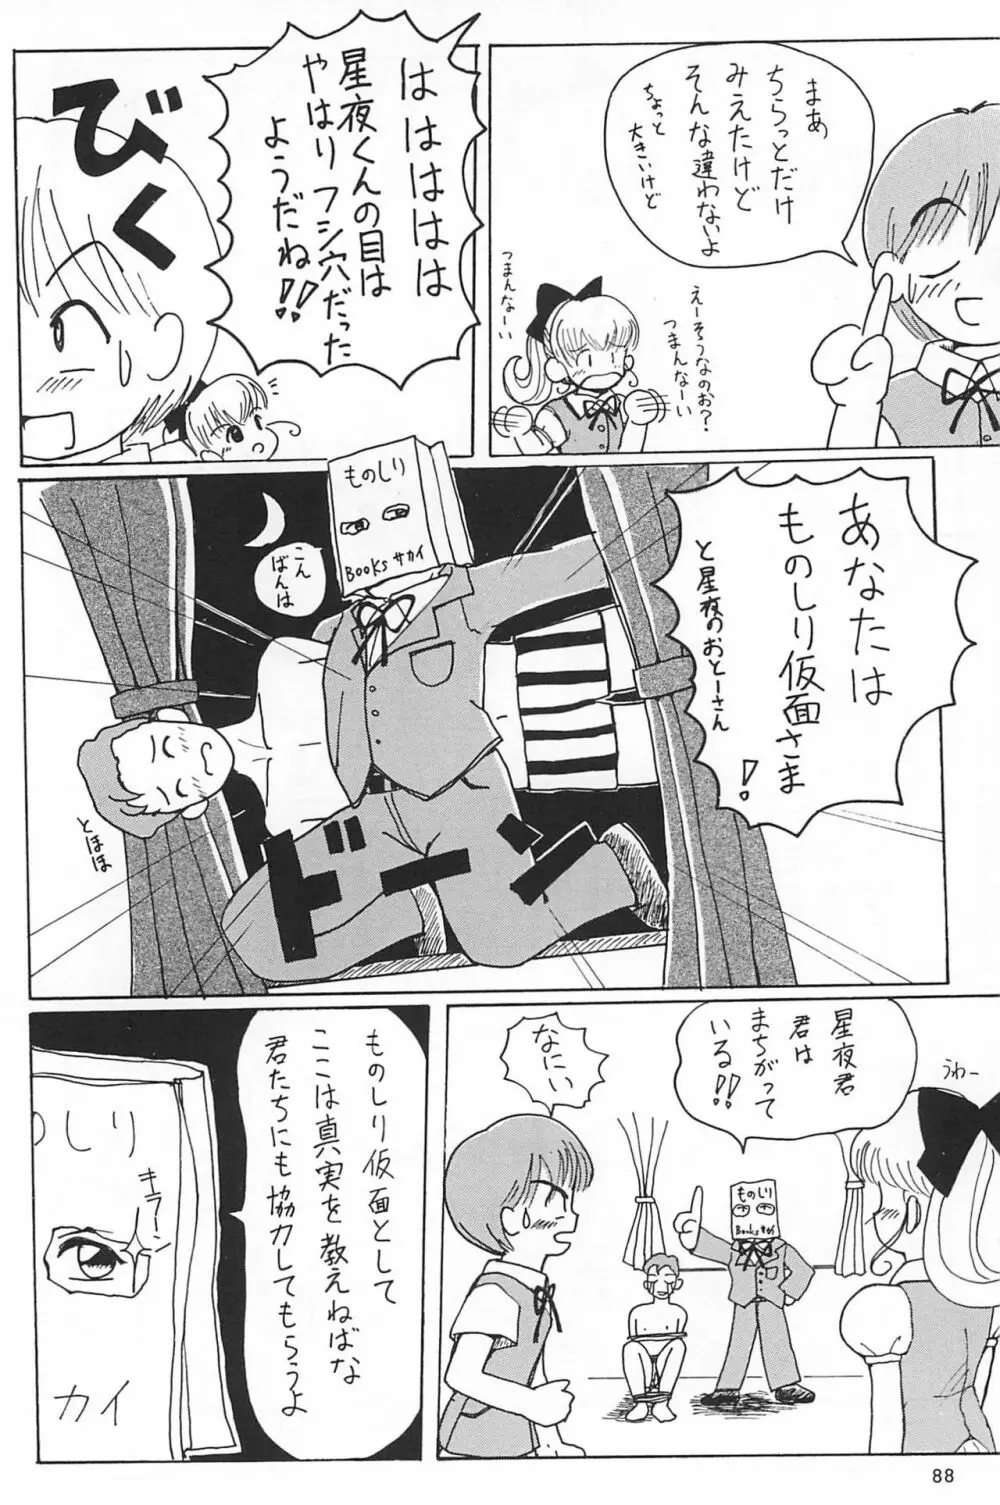 ND-special Volume 1 88ページ